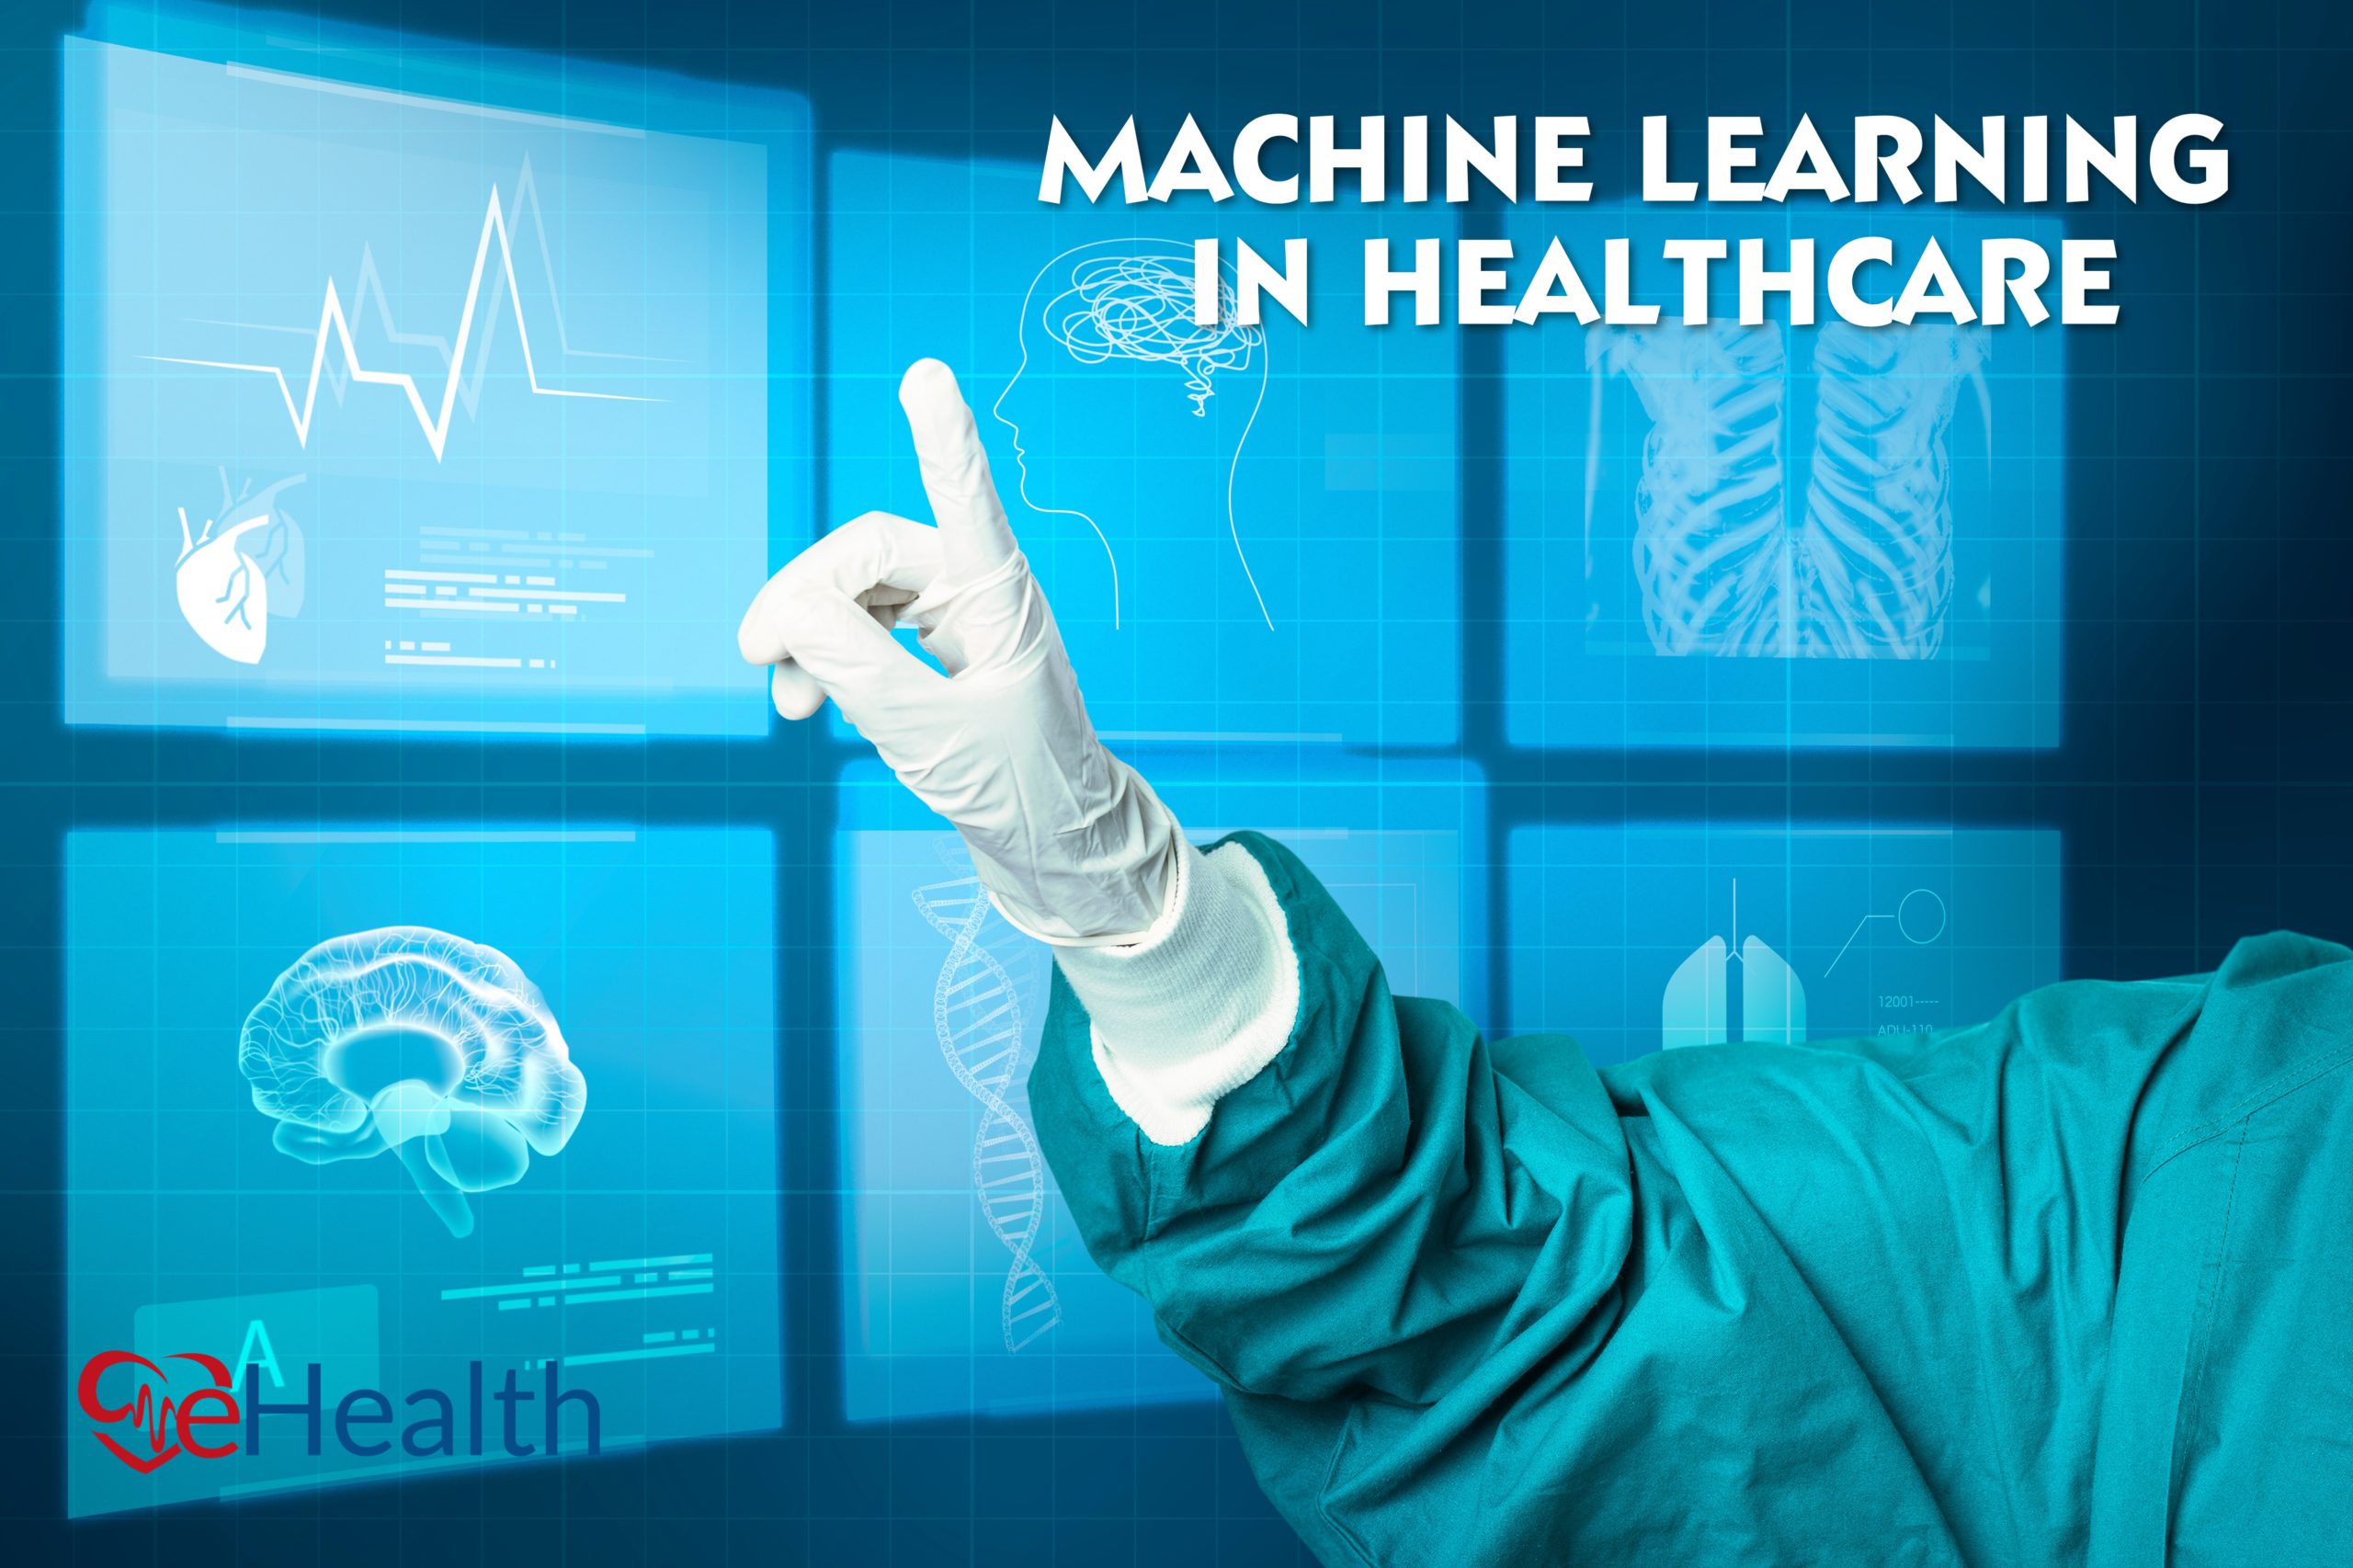 Machine learning in healthcare